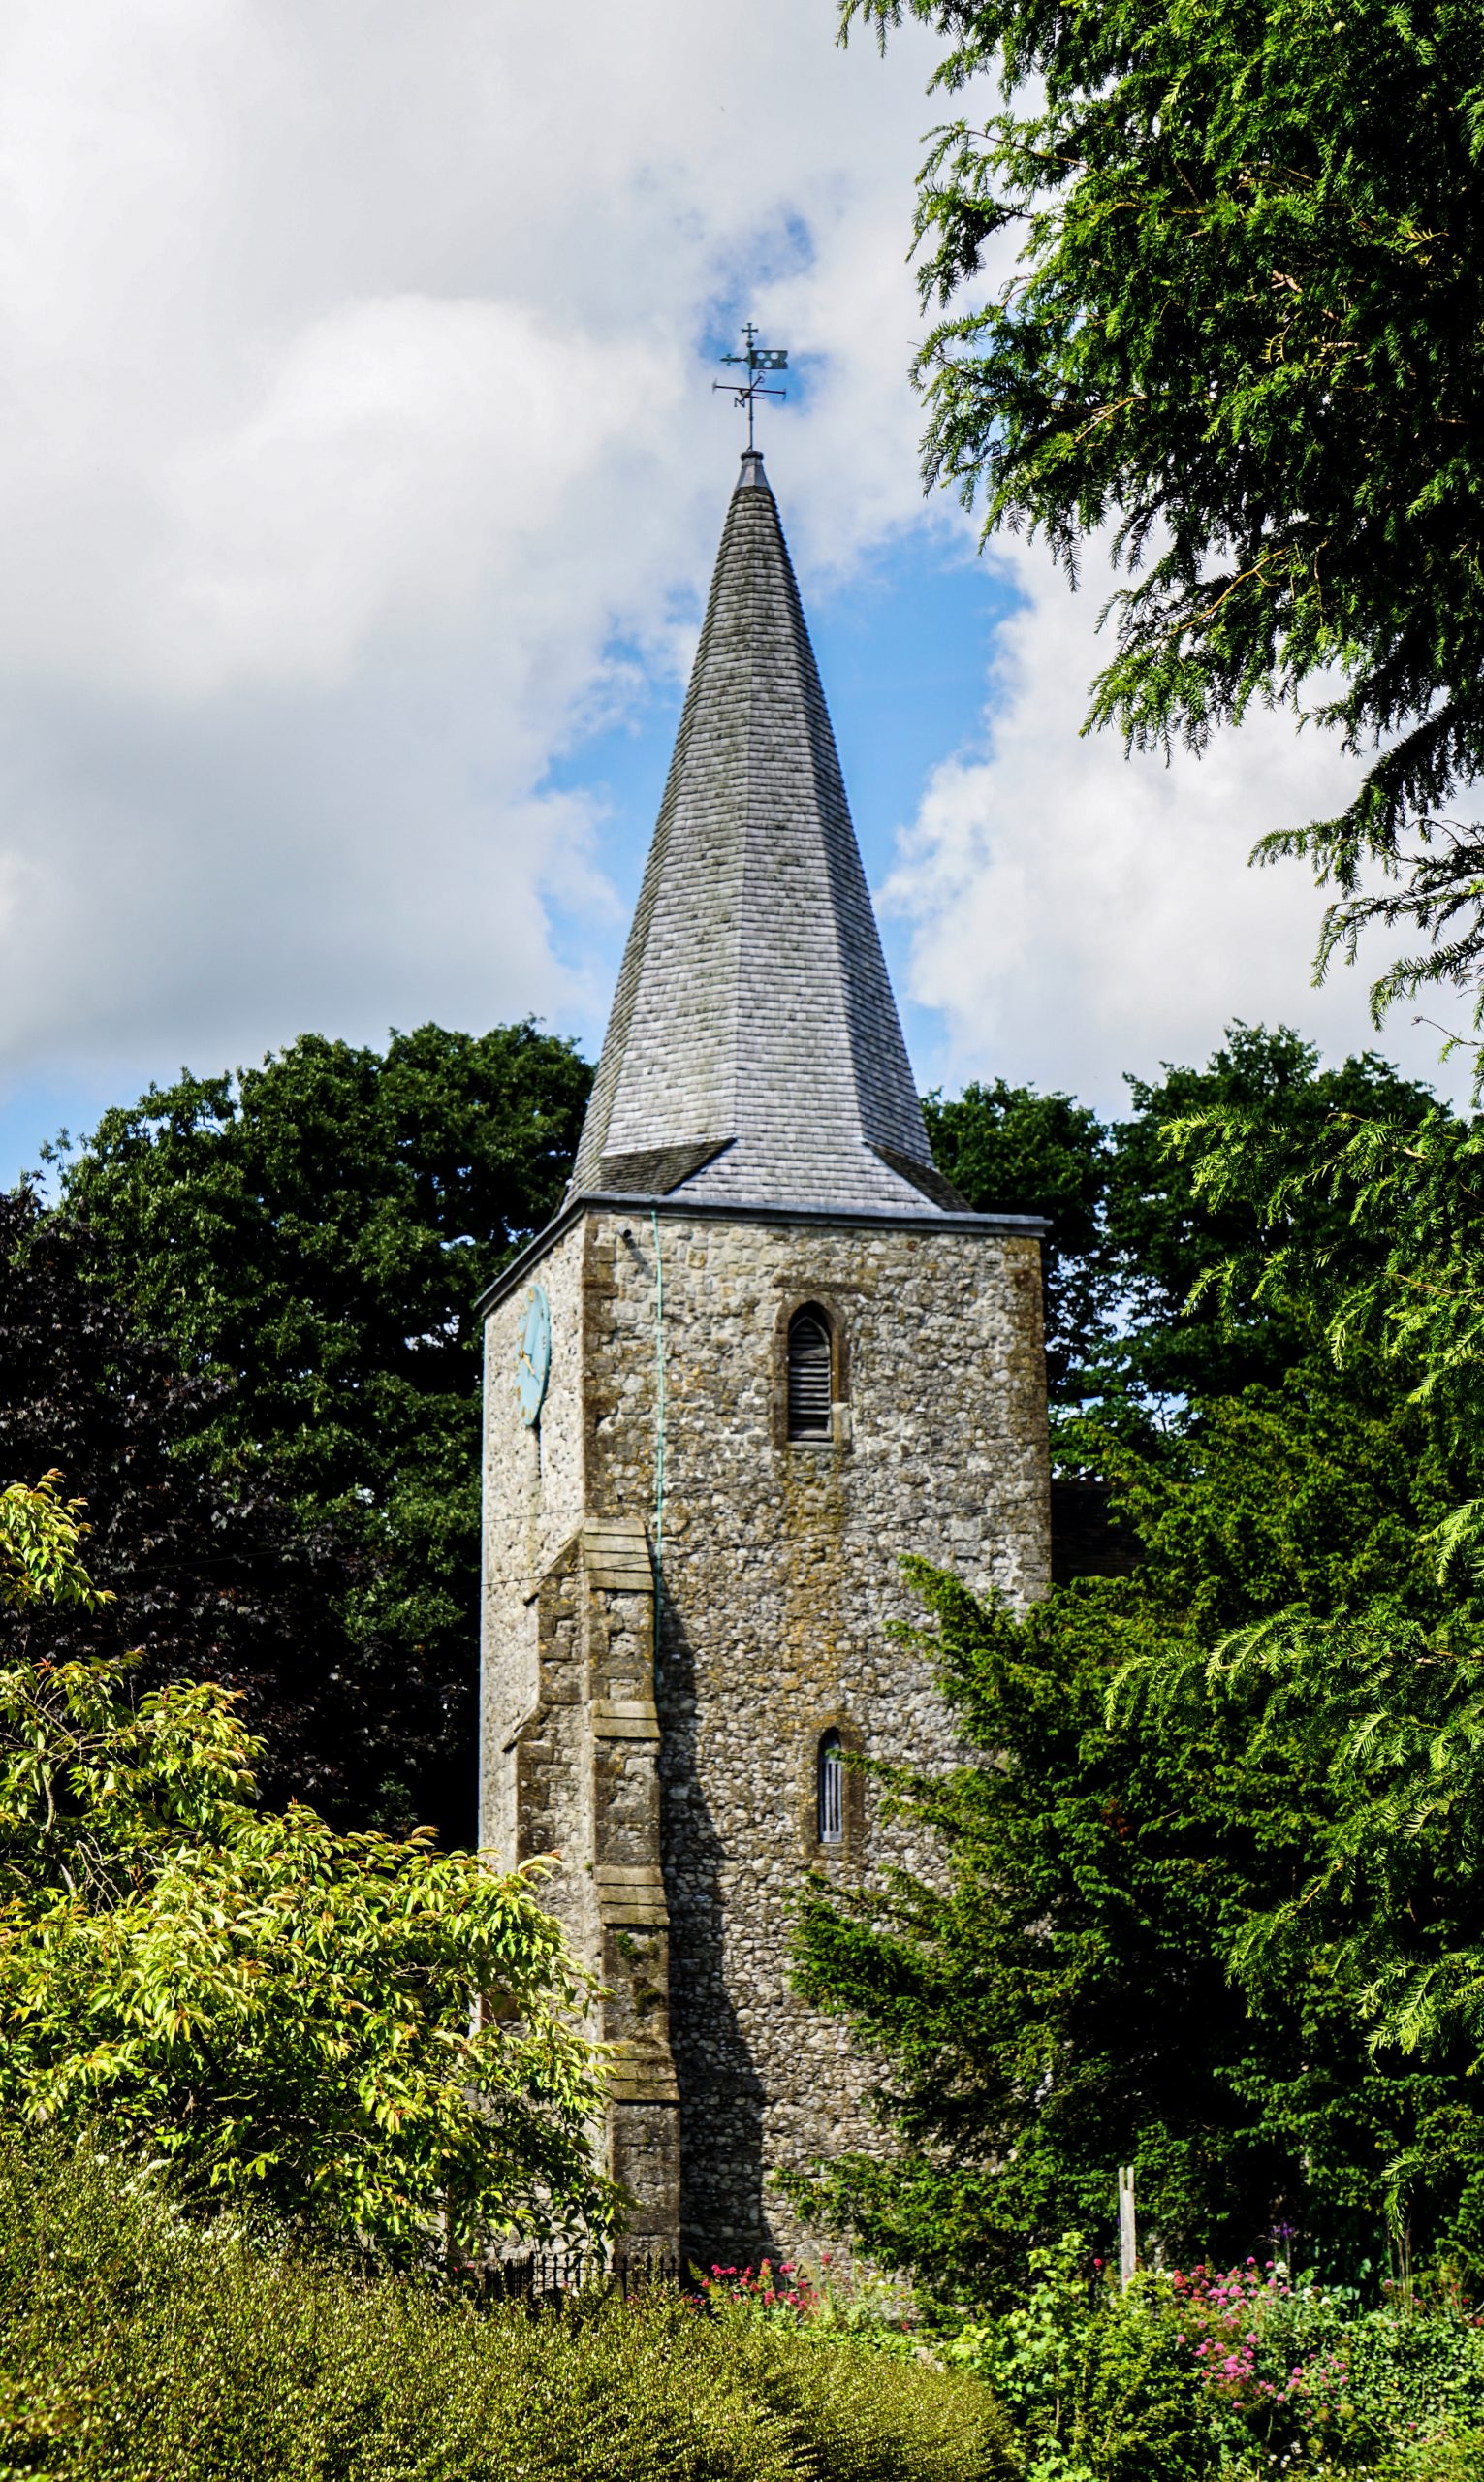 England's Most Haunted Village - St. Nicholas Bell Tower